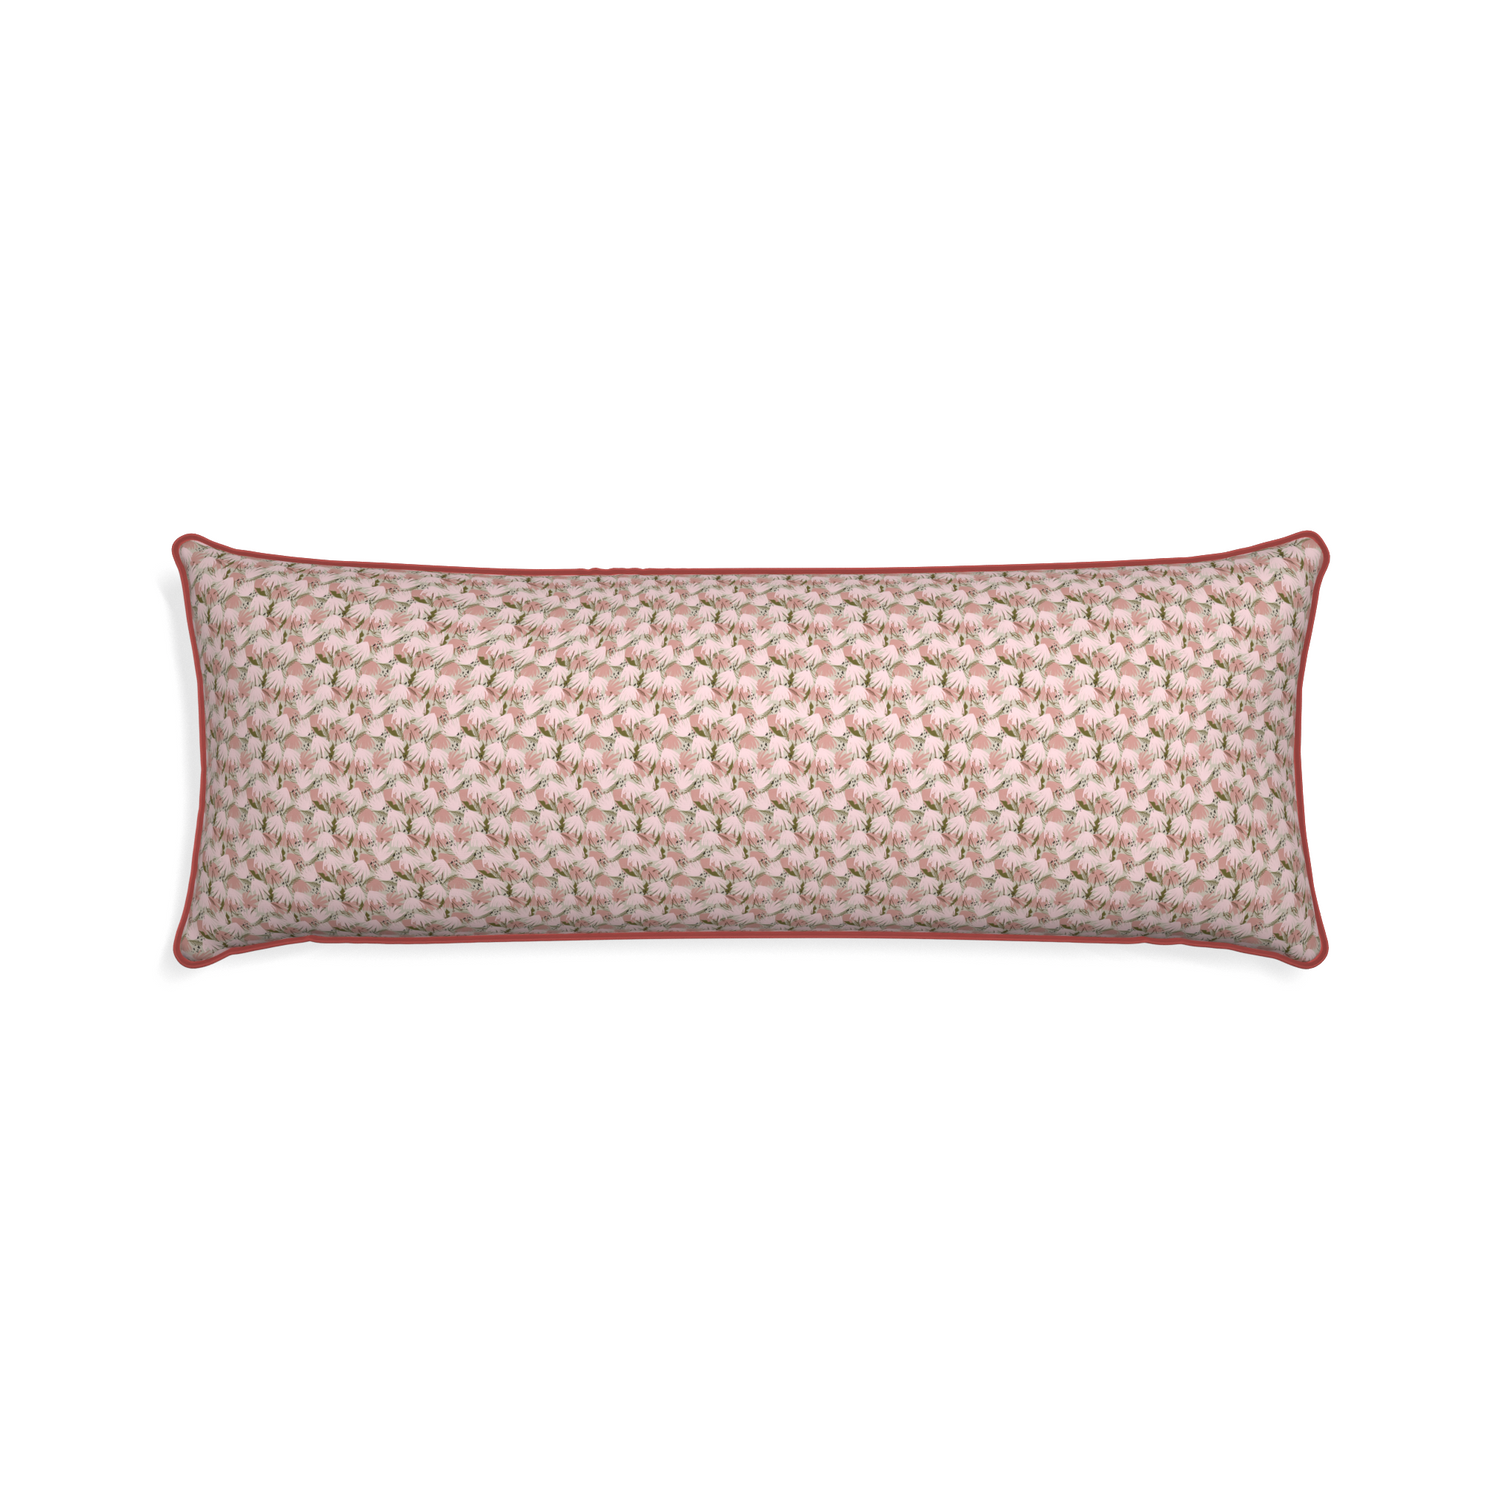 Xl-lumbar eden pink custom pink floralpillow with c piping on white background